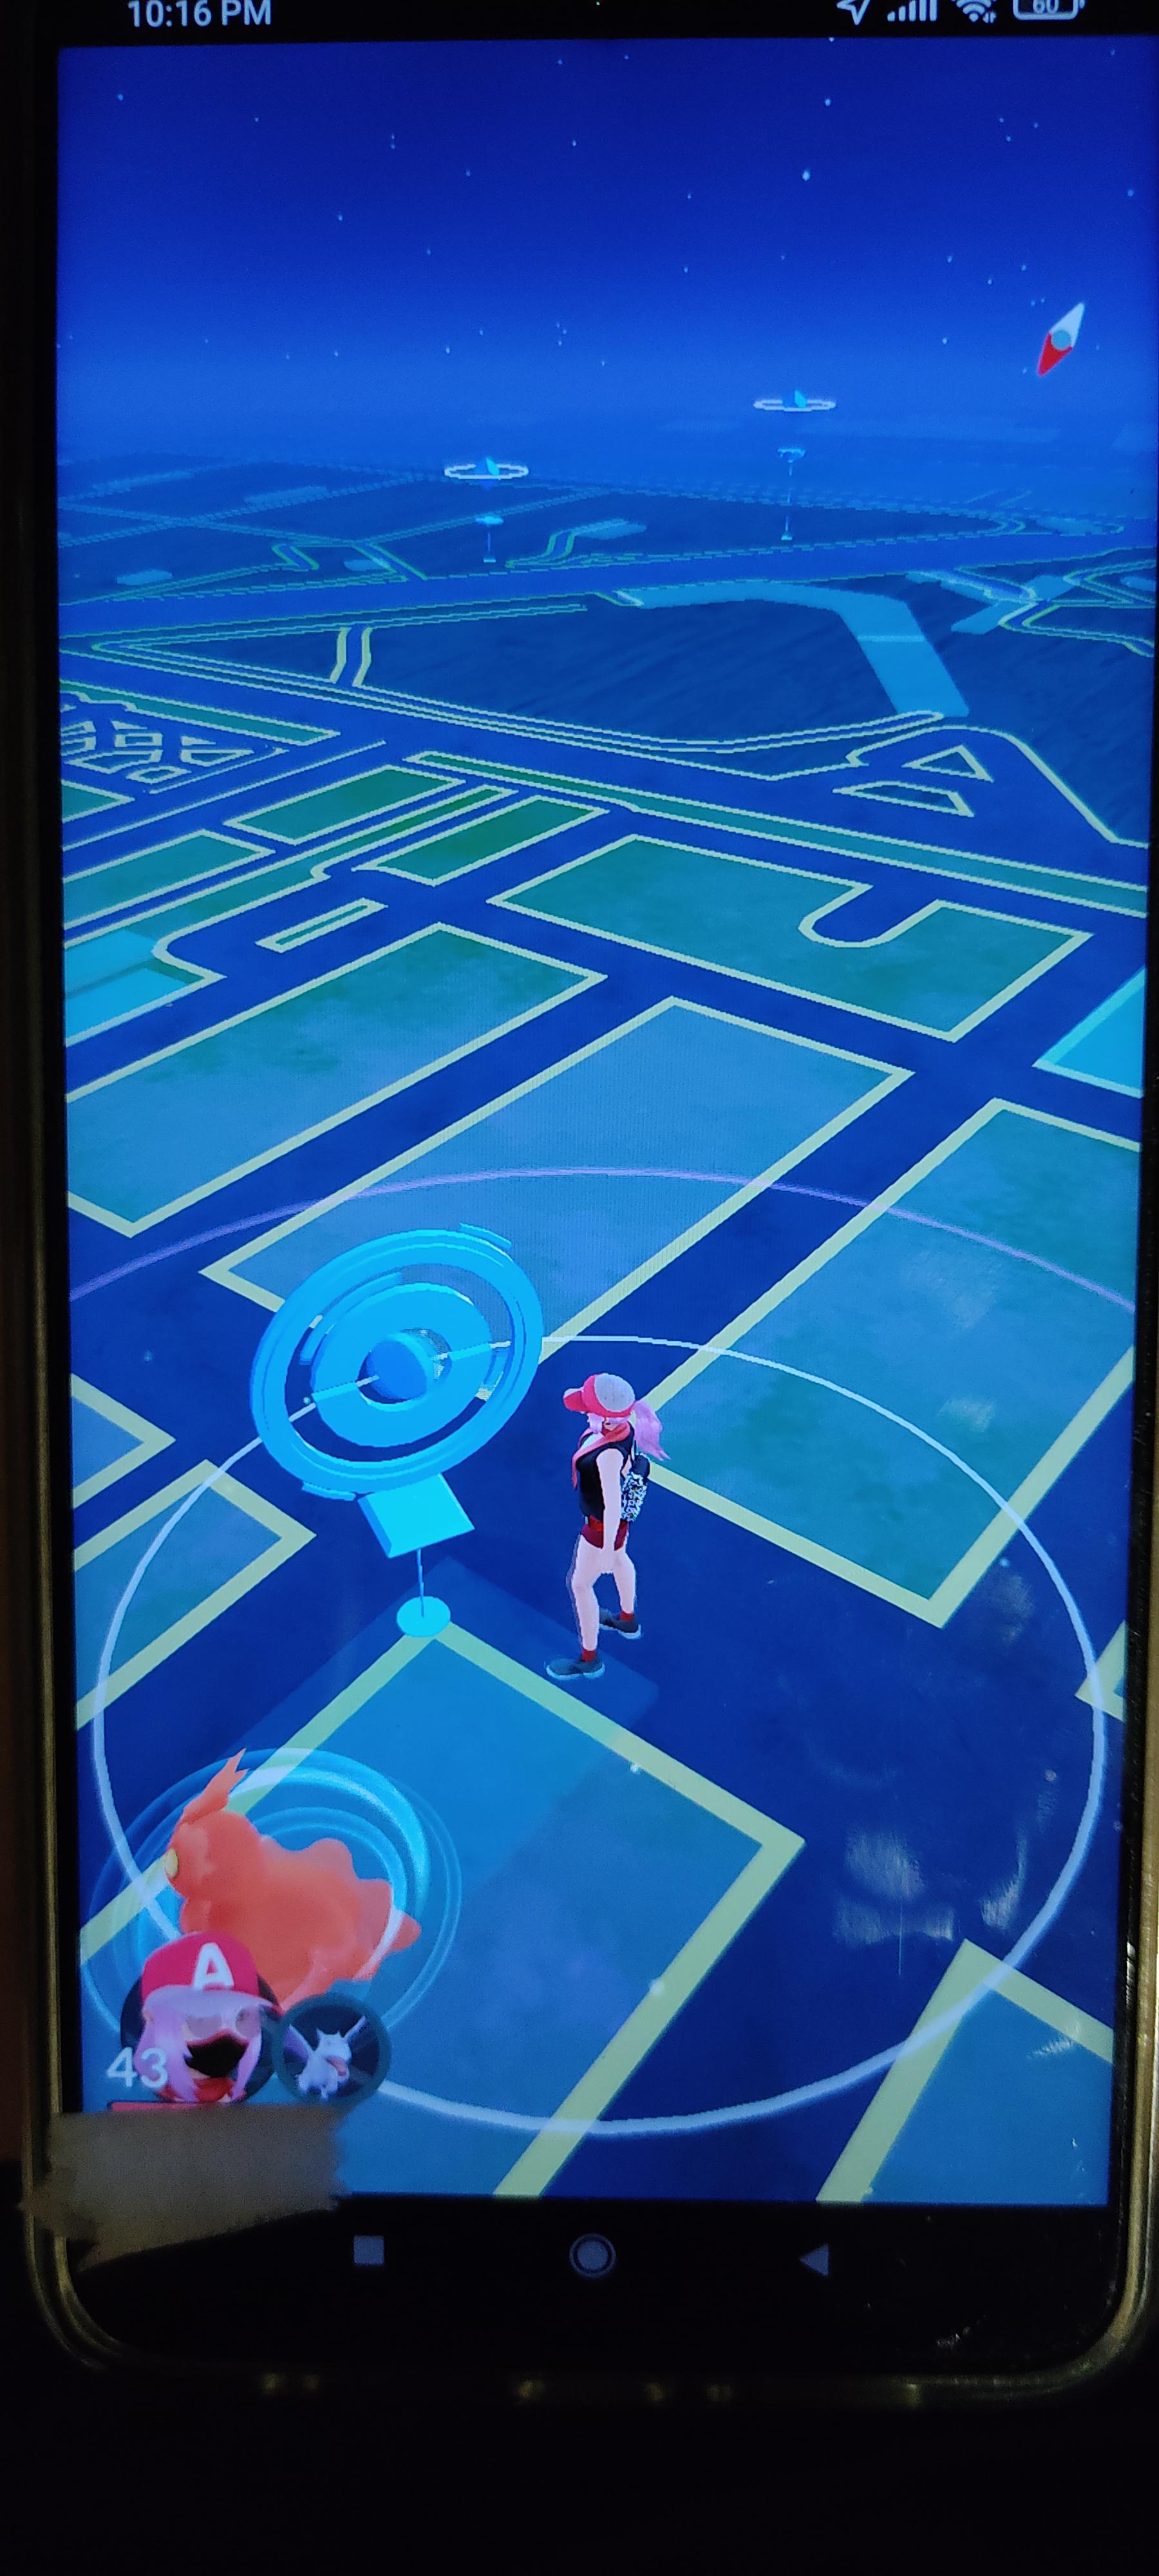 Launch the Pokemon Go app on your device.
Tap on the Pokeball icon located at the bottom of the screen to access the menu.